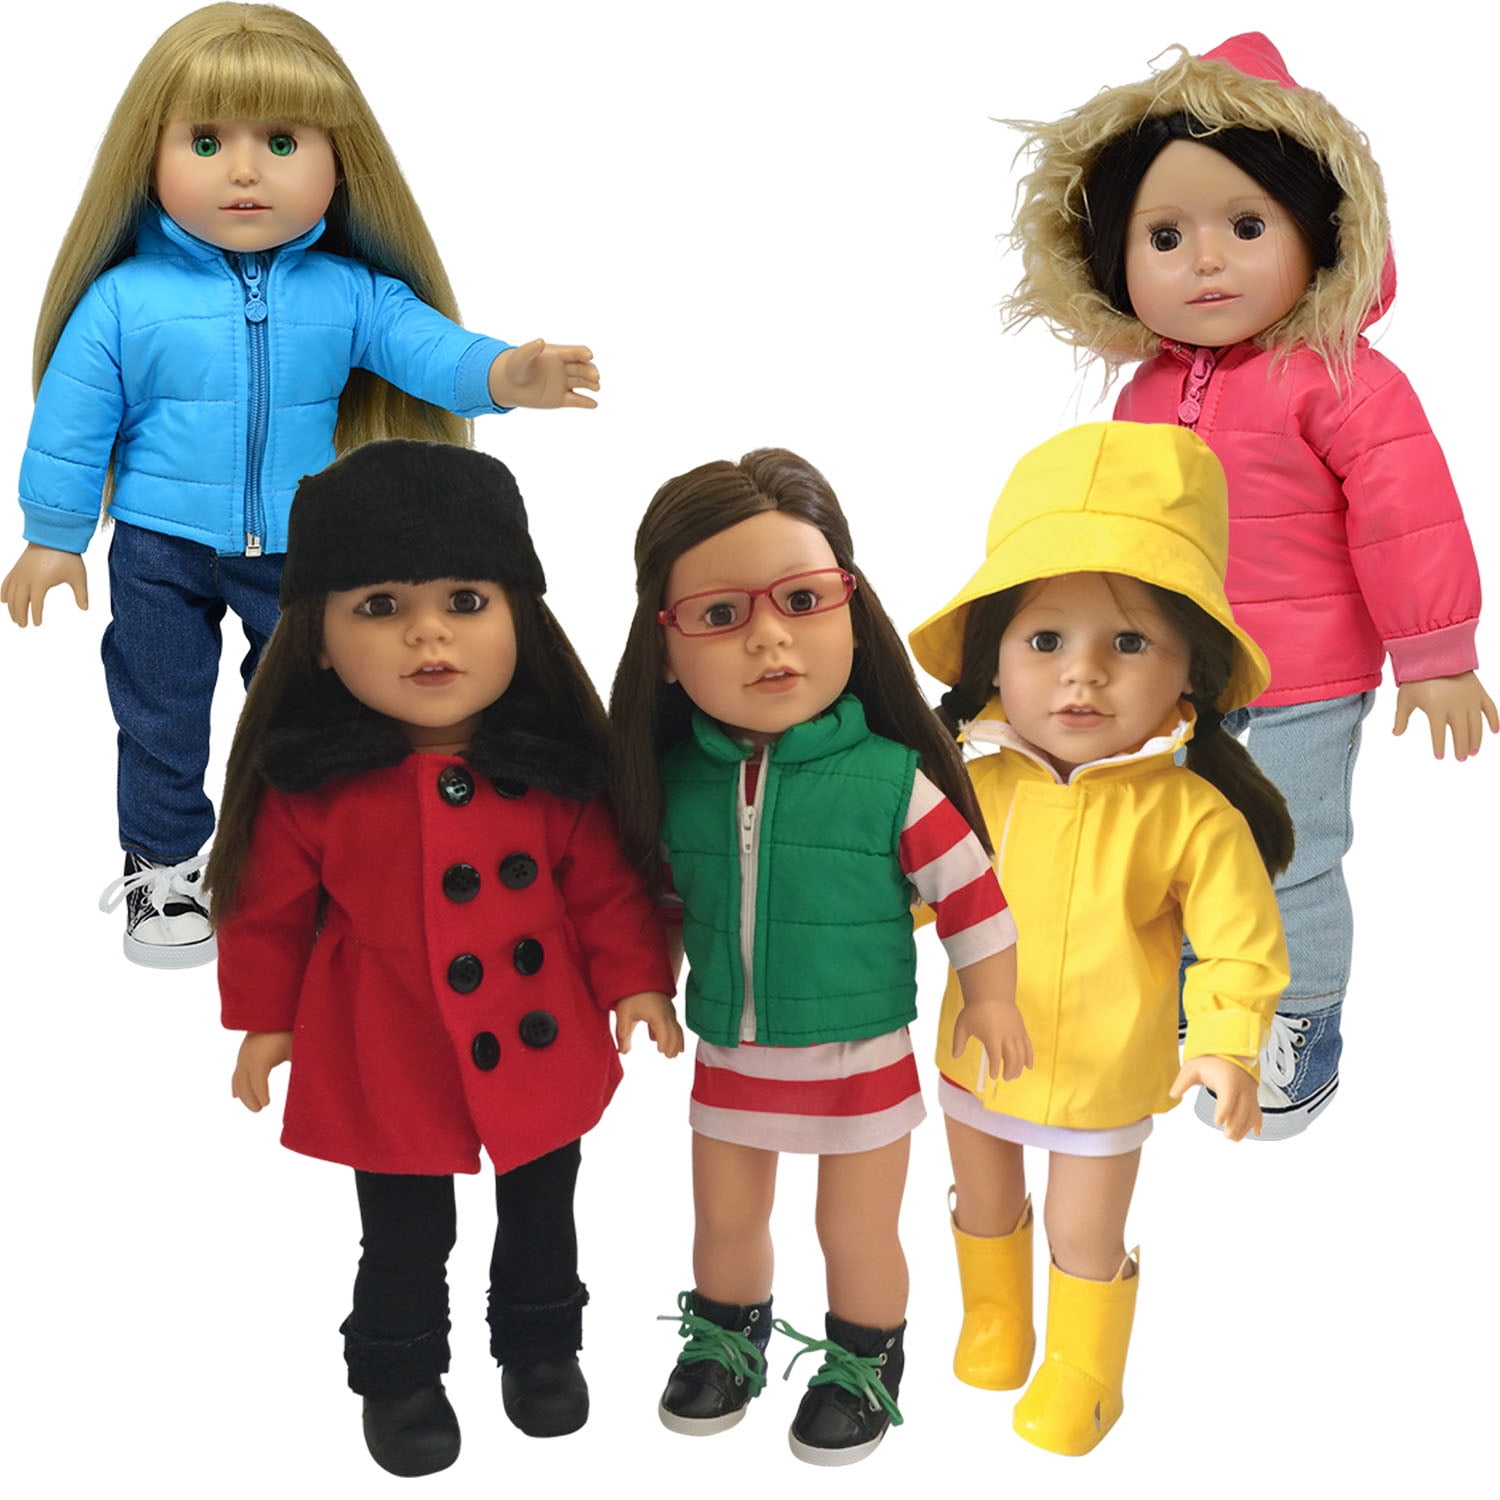 Fashion Doll Clothes White+Black Warm Cute Winter Clothes Jacket Coat and Trousers Outfit Accessories Set for 18 Inch American Girl Doll Accessories Girl Gift Toy